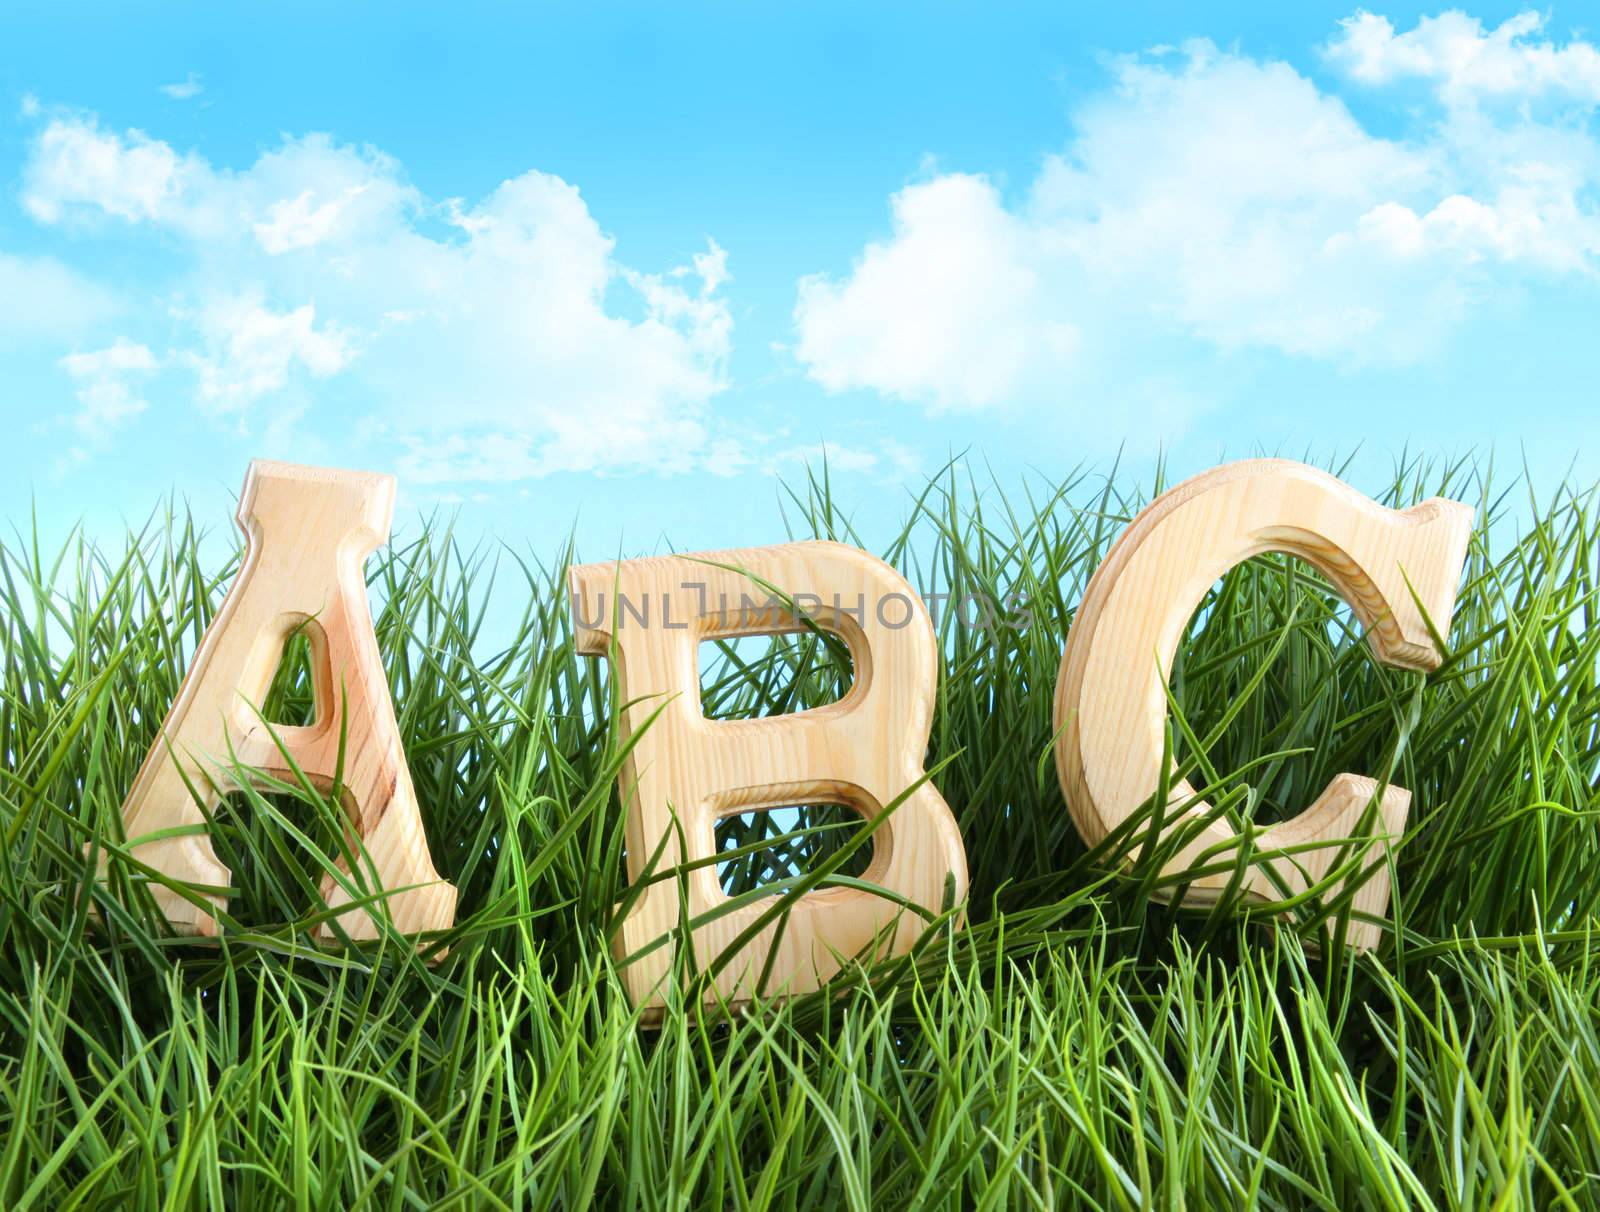 ABC letters in the grass with blue sky